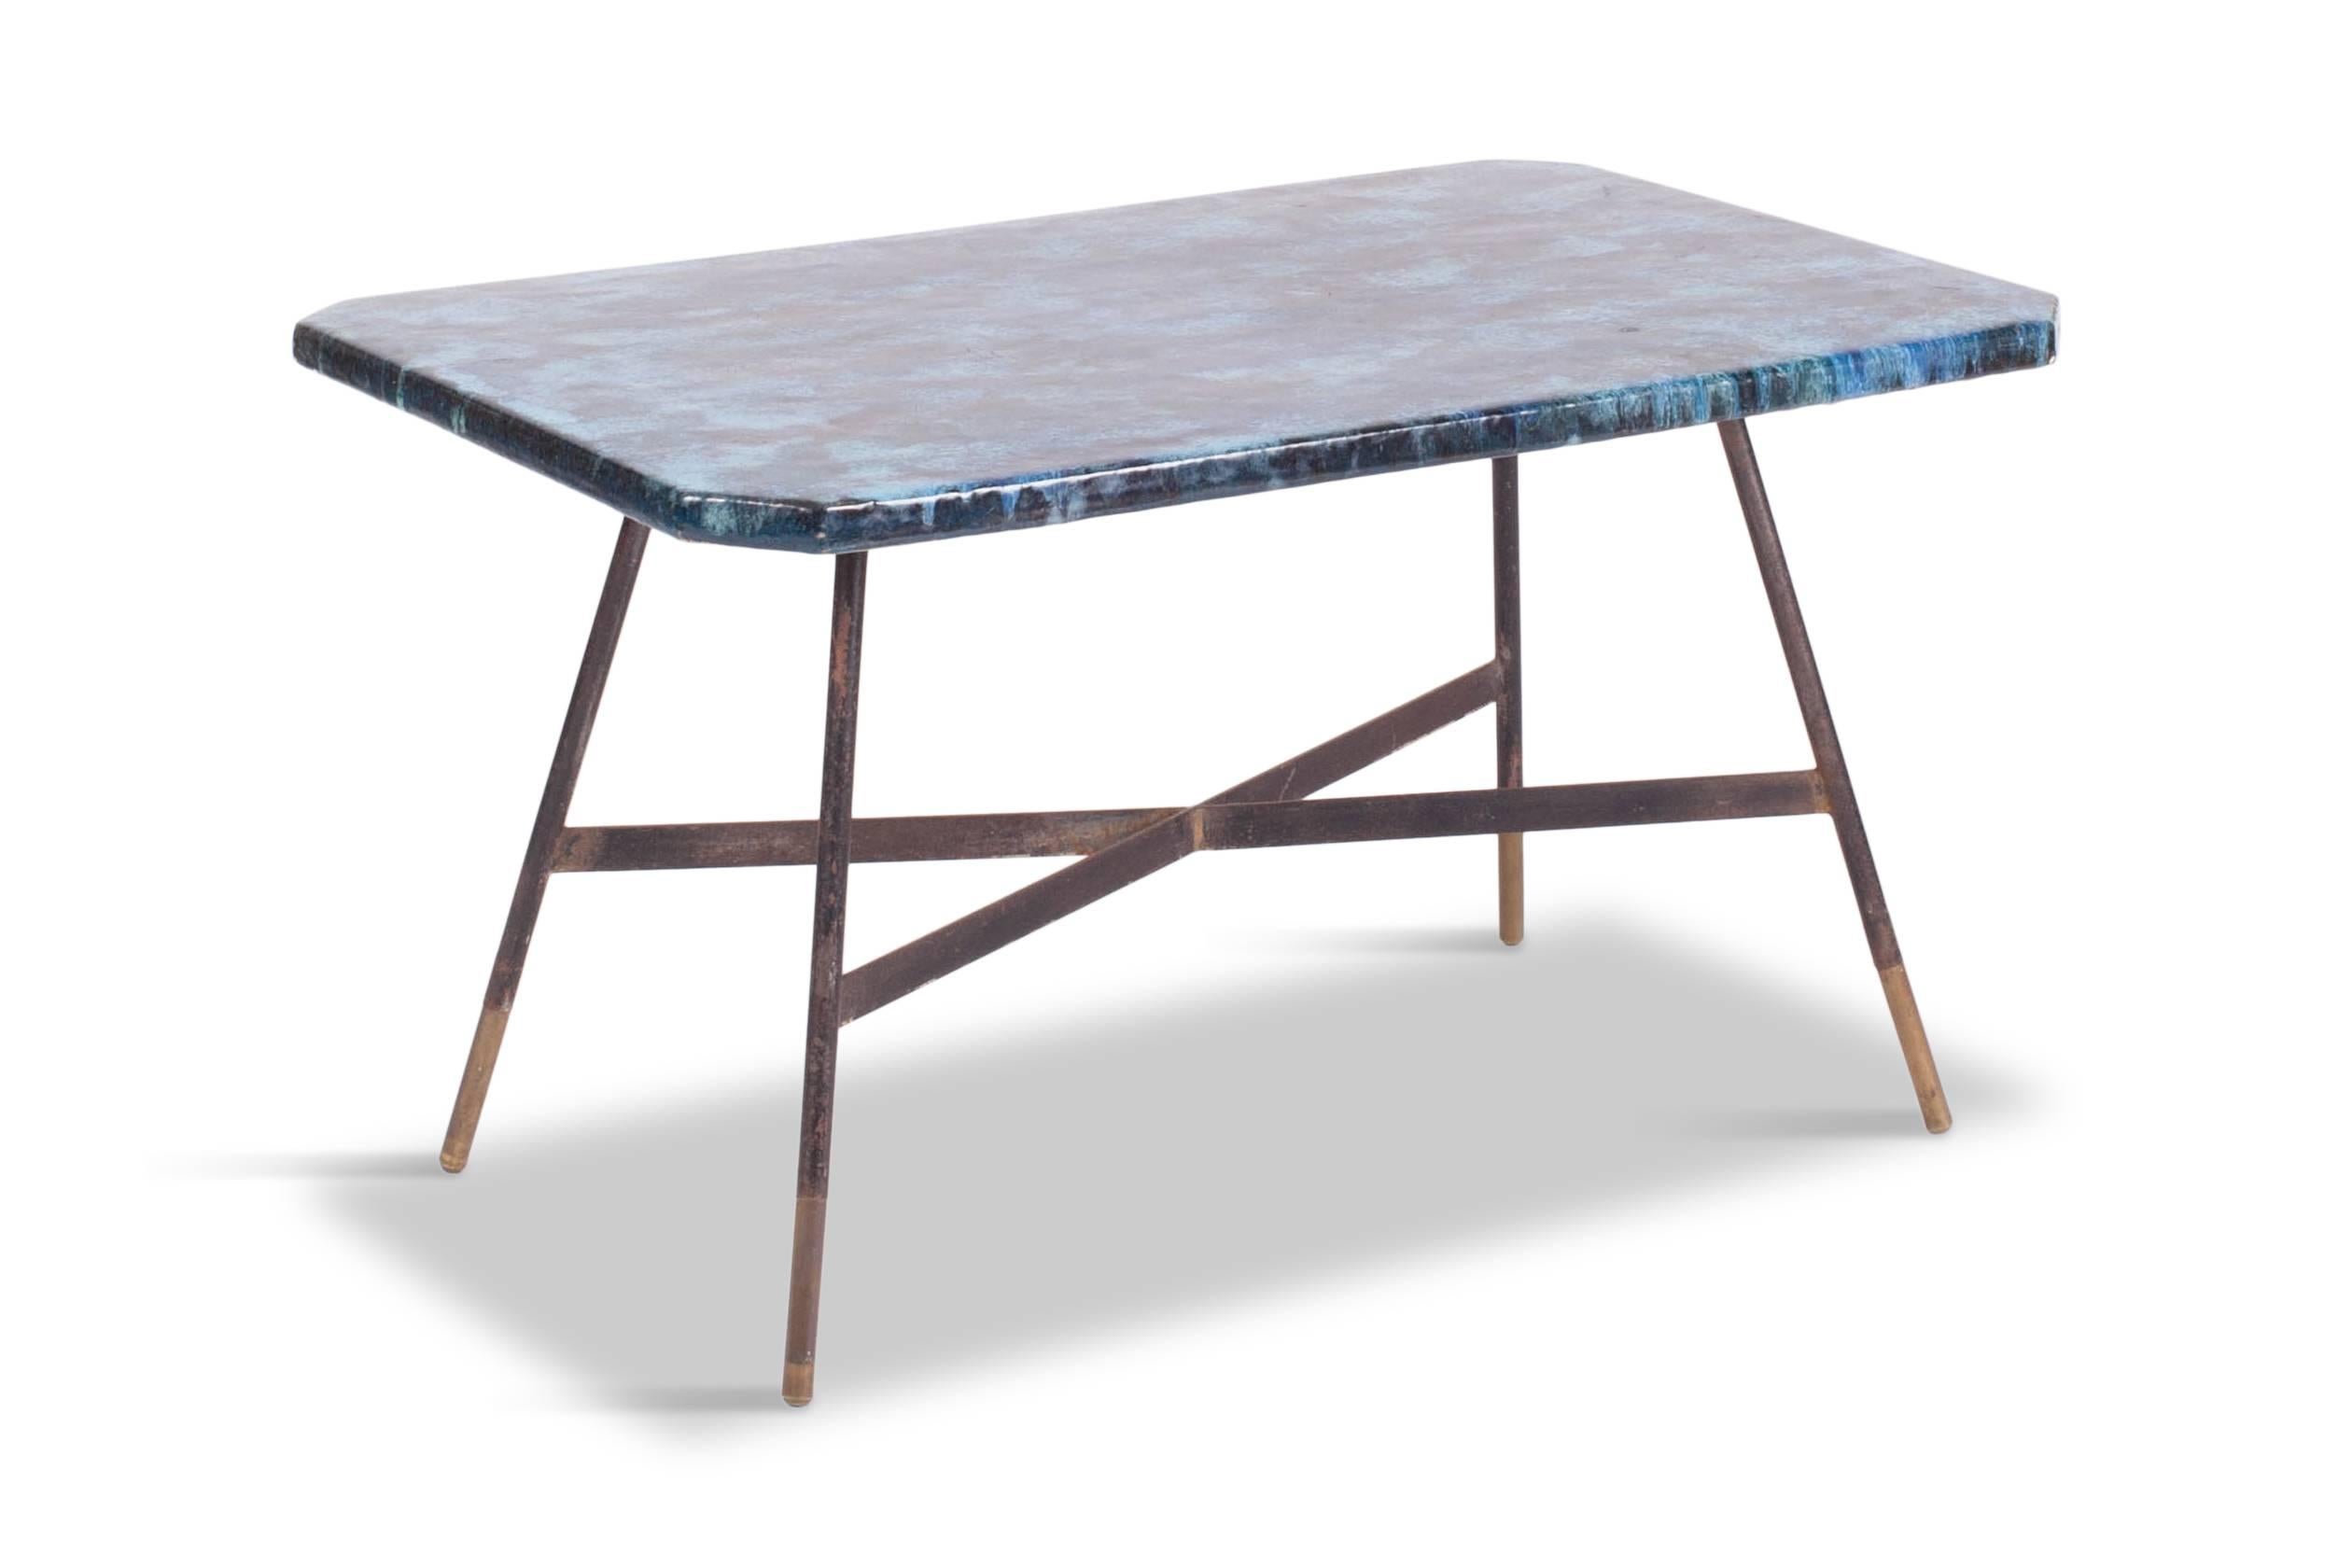 Decorative Italian coffee table signed ACMA Italy on the bottom.
The enamel tabletop is provided with a cloud like illustration in a variety of blue tones, done in porcelain glaze.

The black lacquered steel frame is finished with elegant brass foot